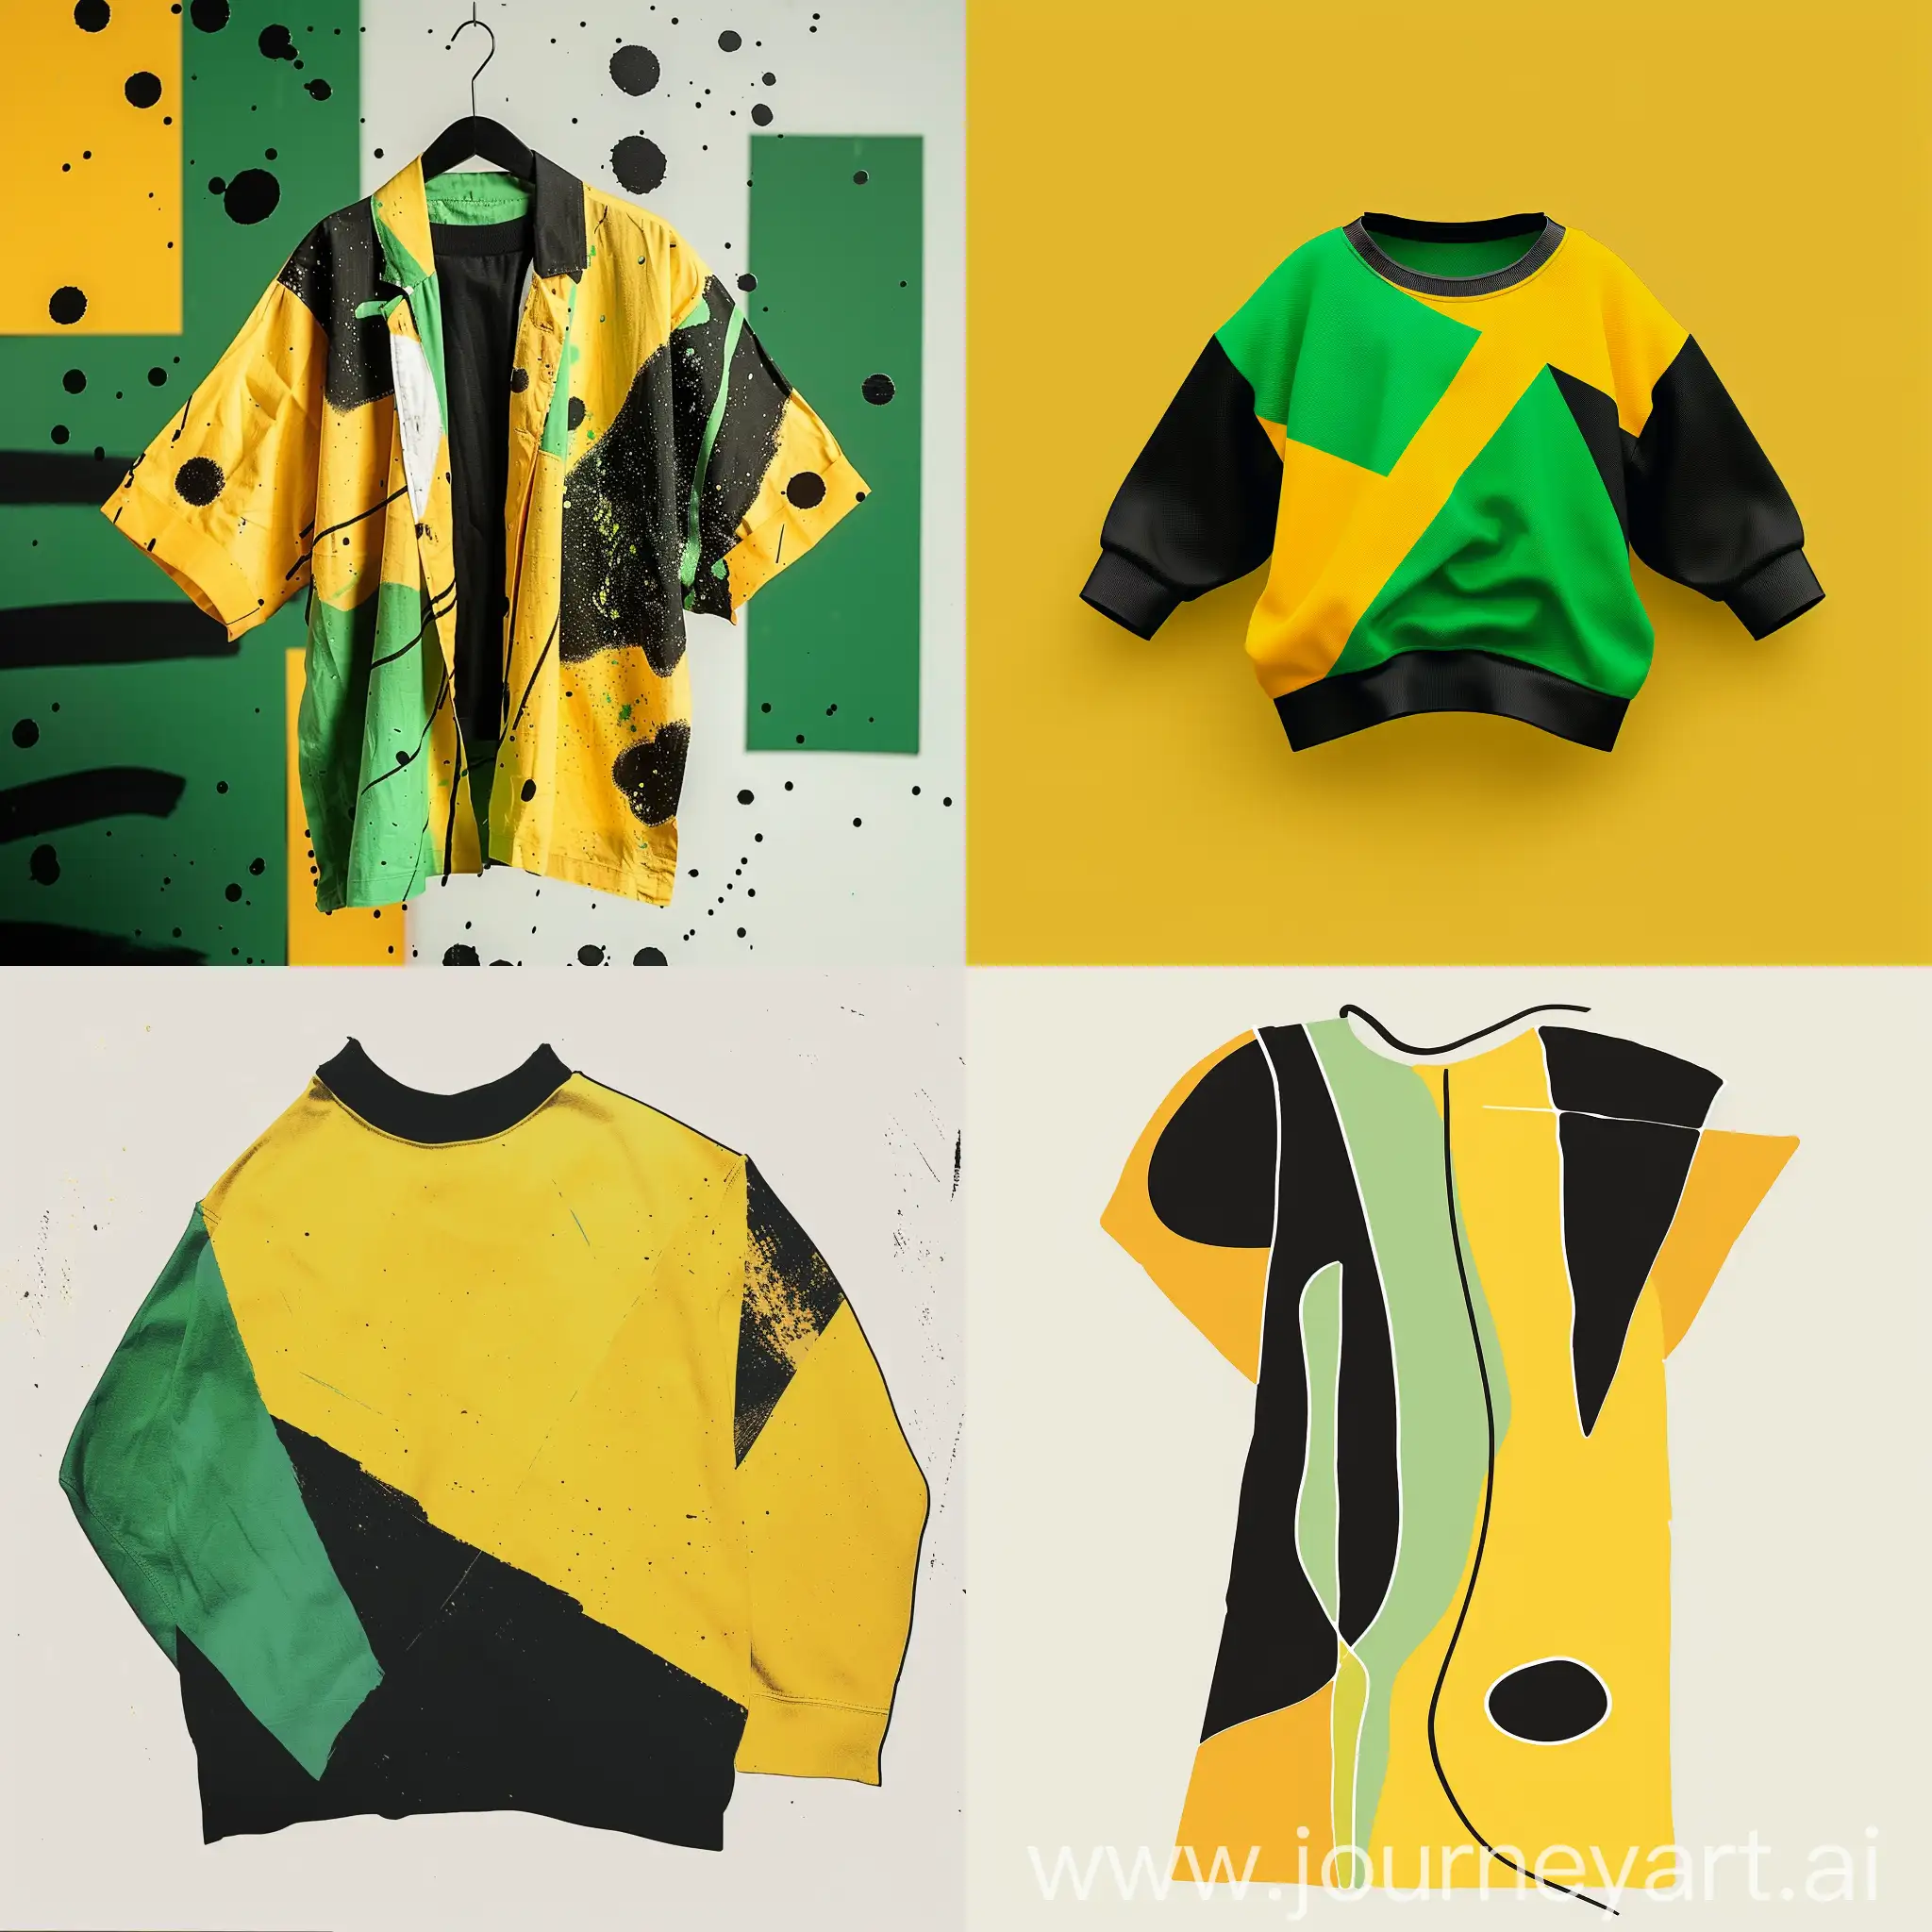 A clothing design using the colors yellow, black and green to create hope in the mind of an abused child, to be happy about the future, shapes, colors, surface nature, lightness, happy feelings.